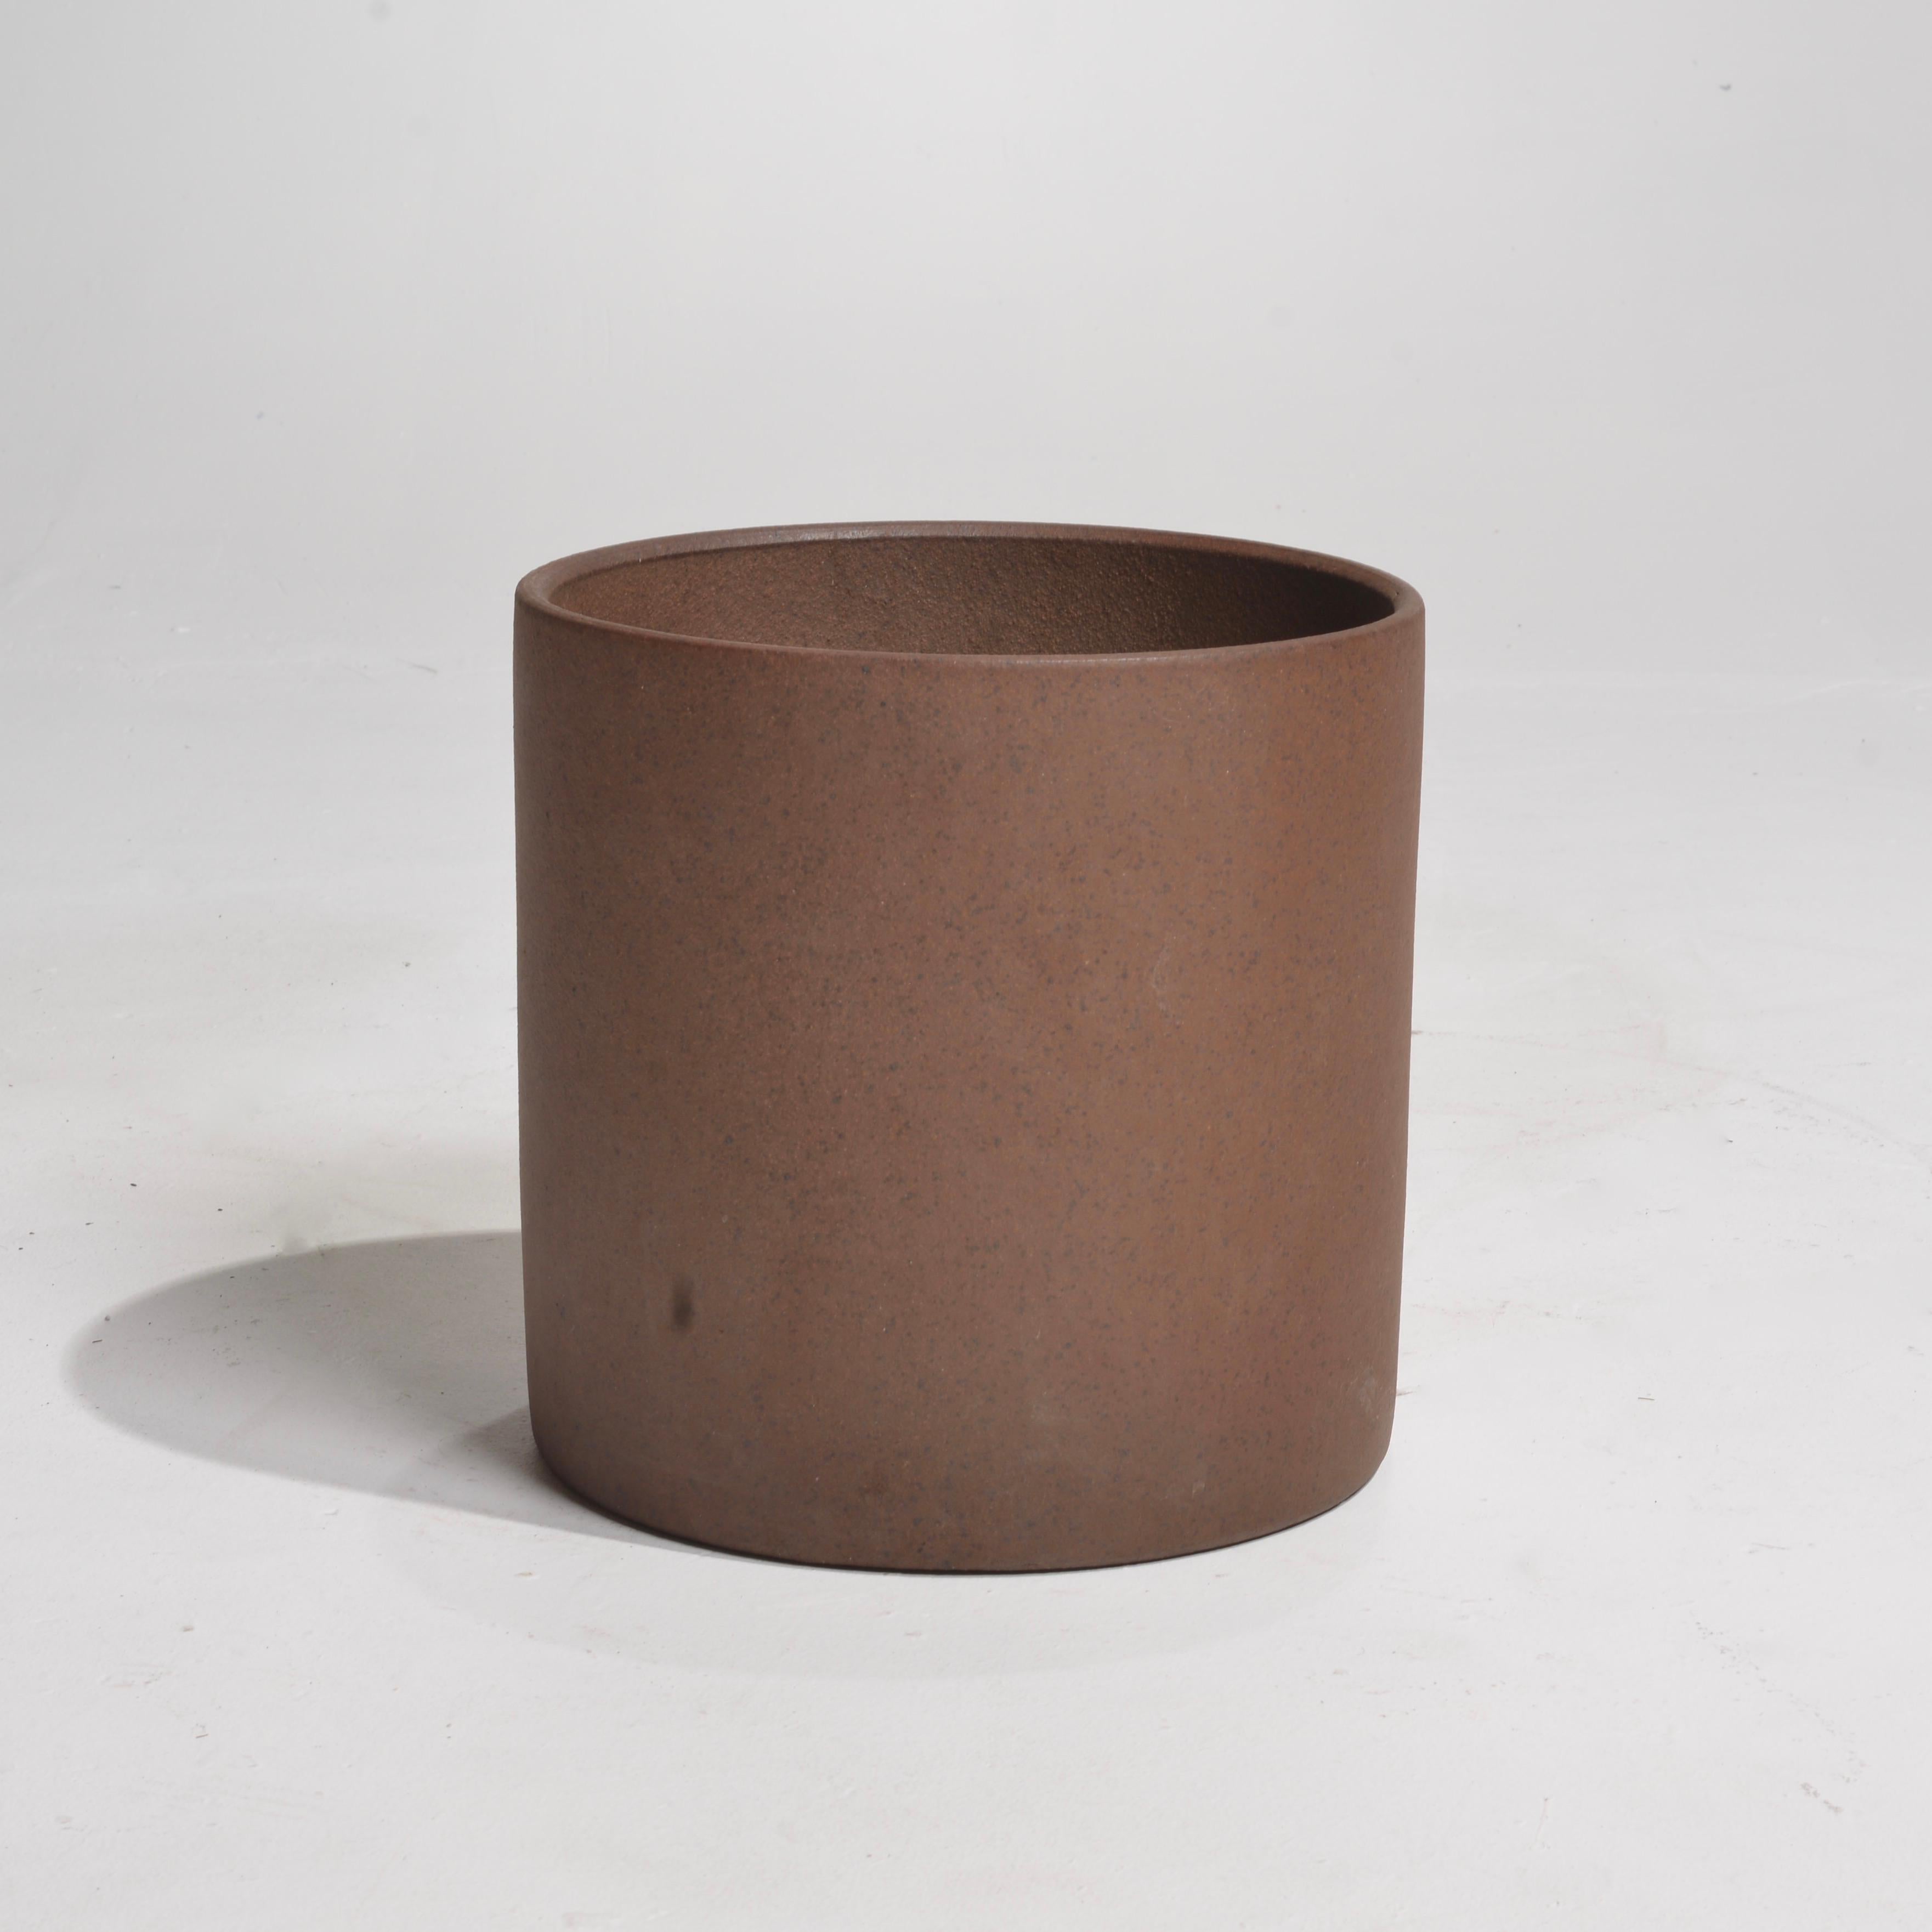 American David Cressey Cylindrical Stoneware Planter for Architectural Pottery For Sale